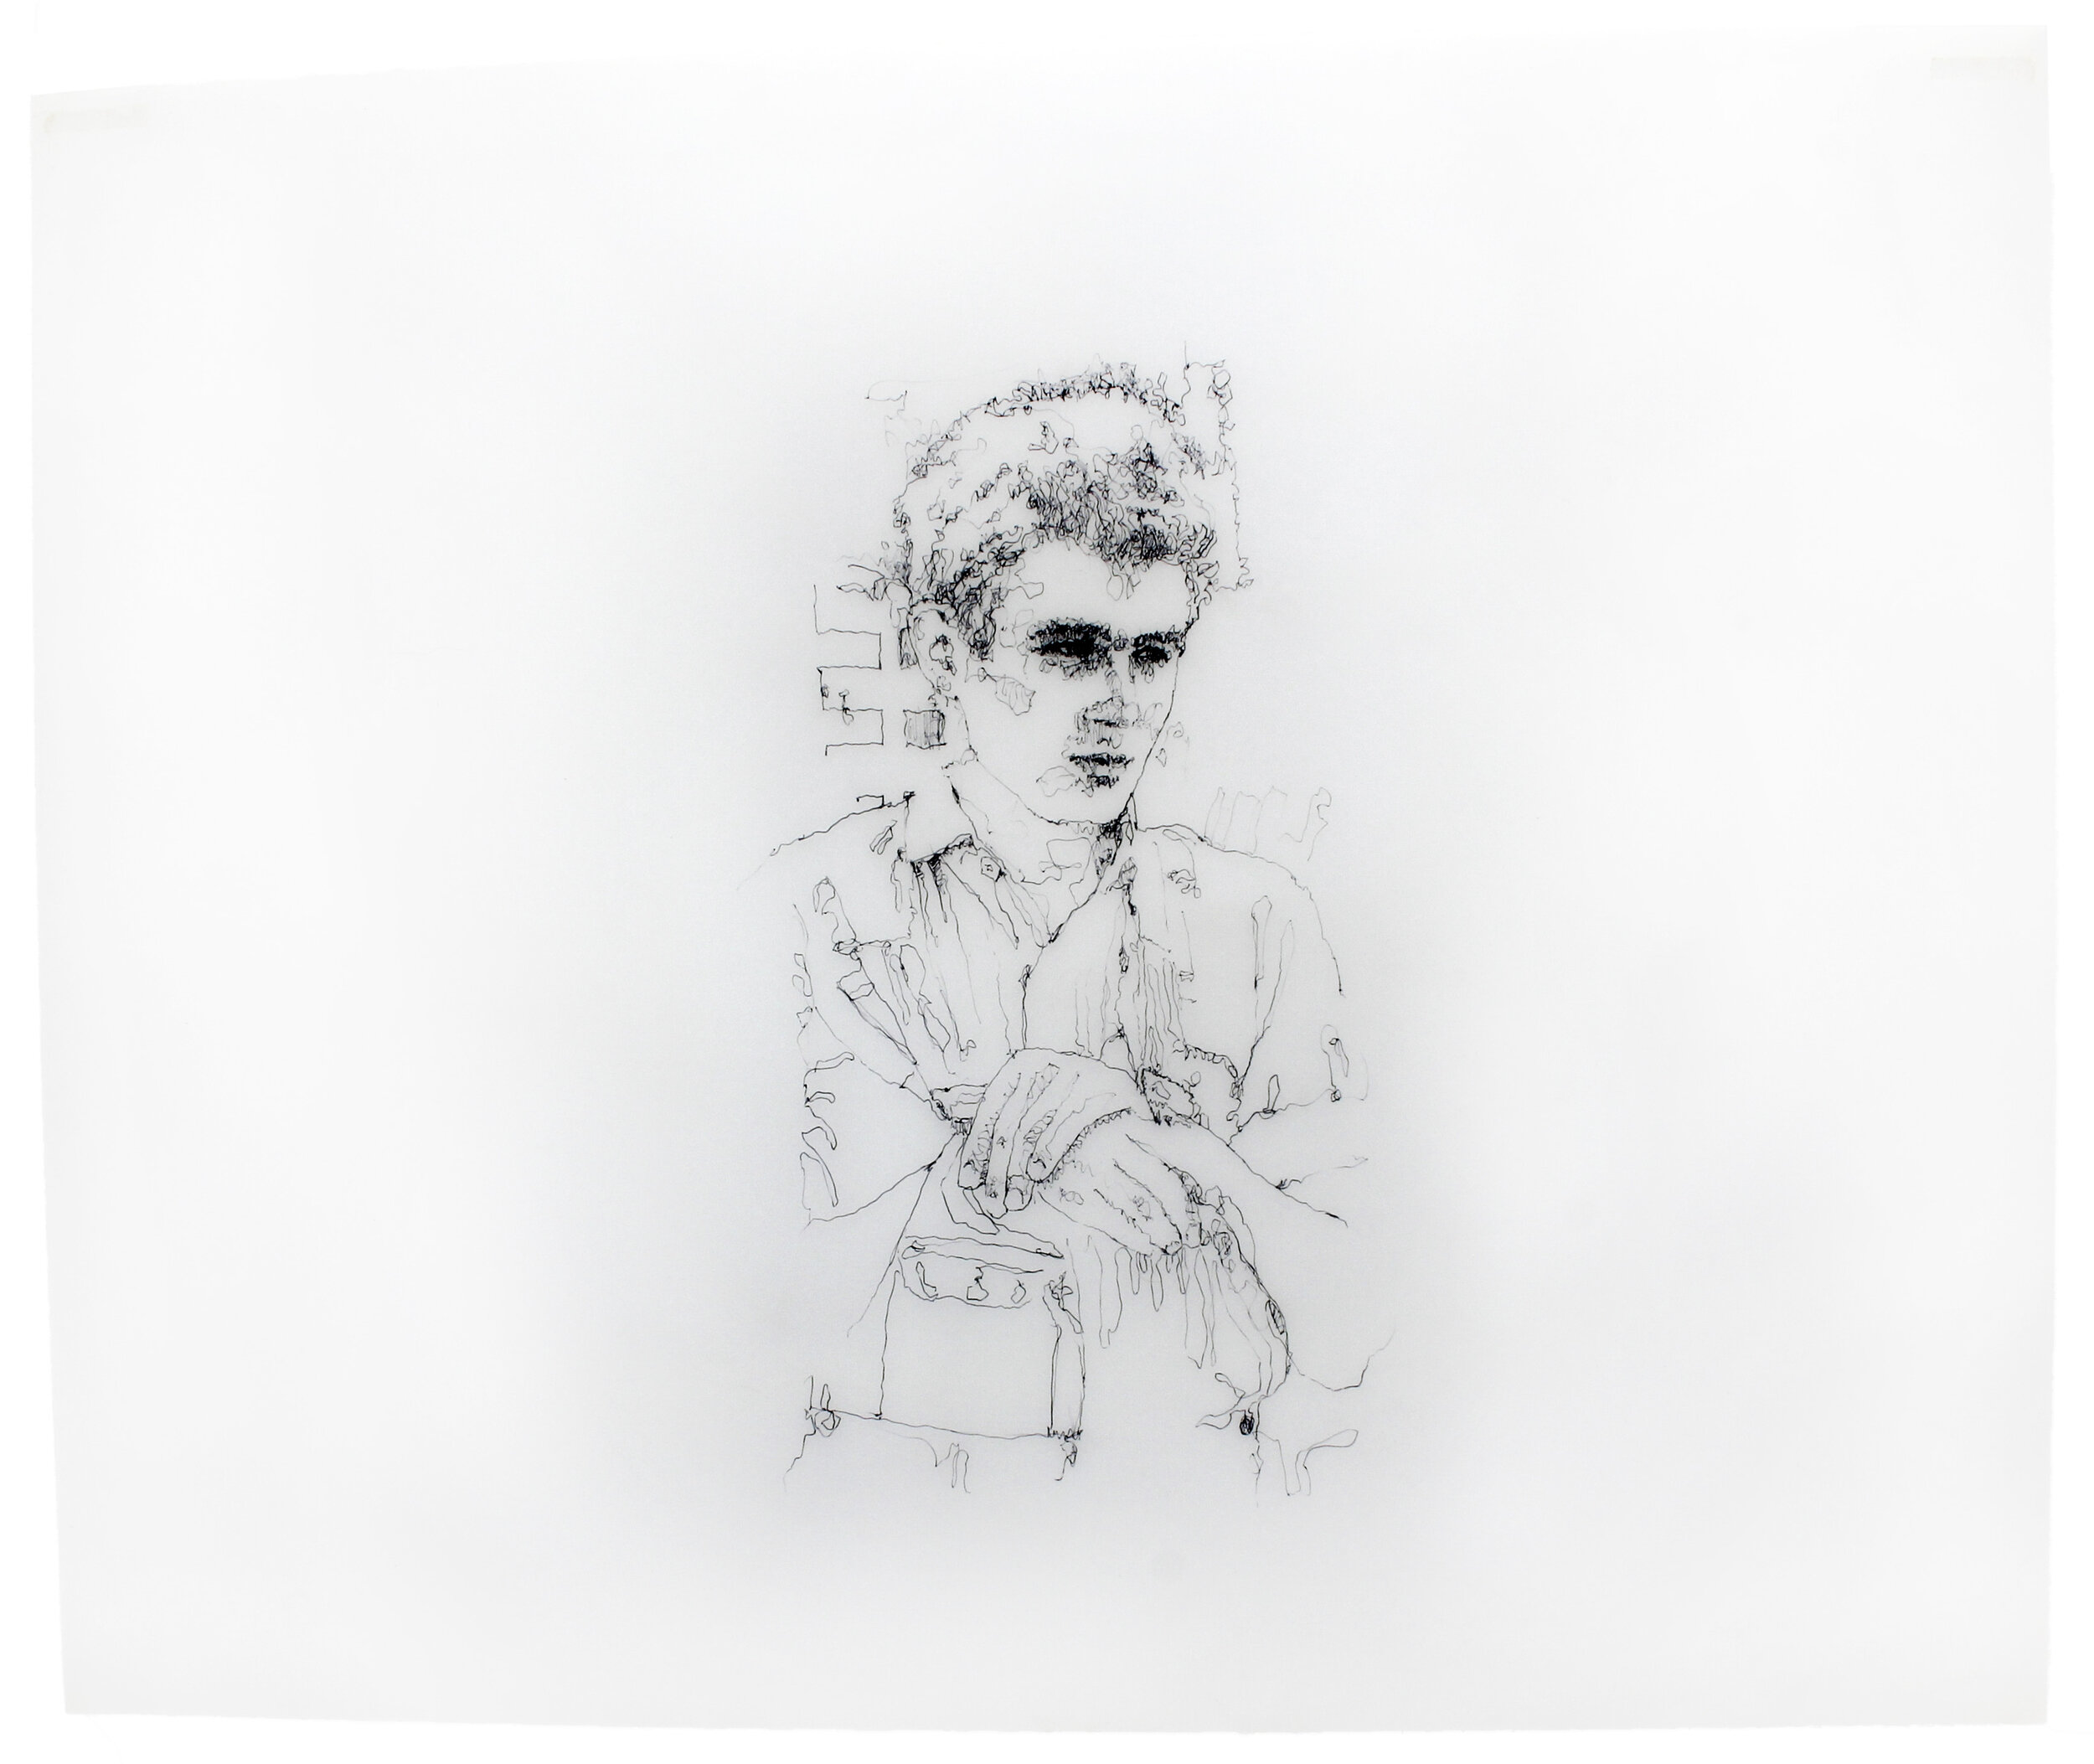 Original title art from the acclaimed 1976 film, 'James Dean.'